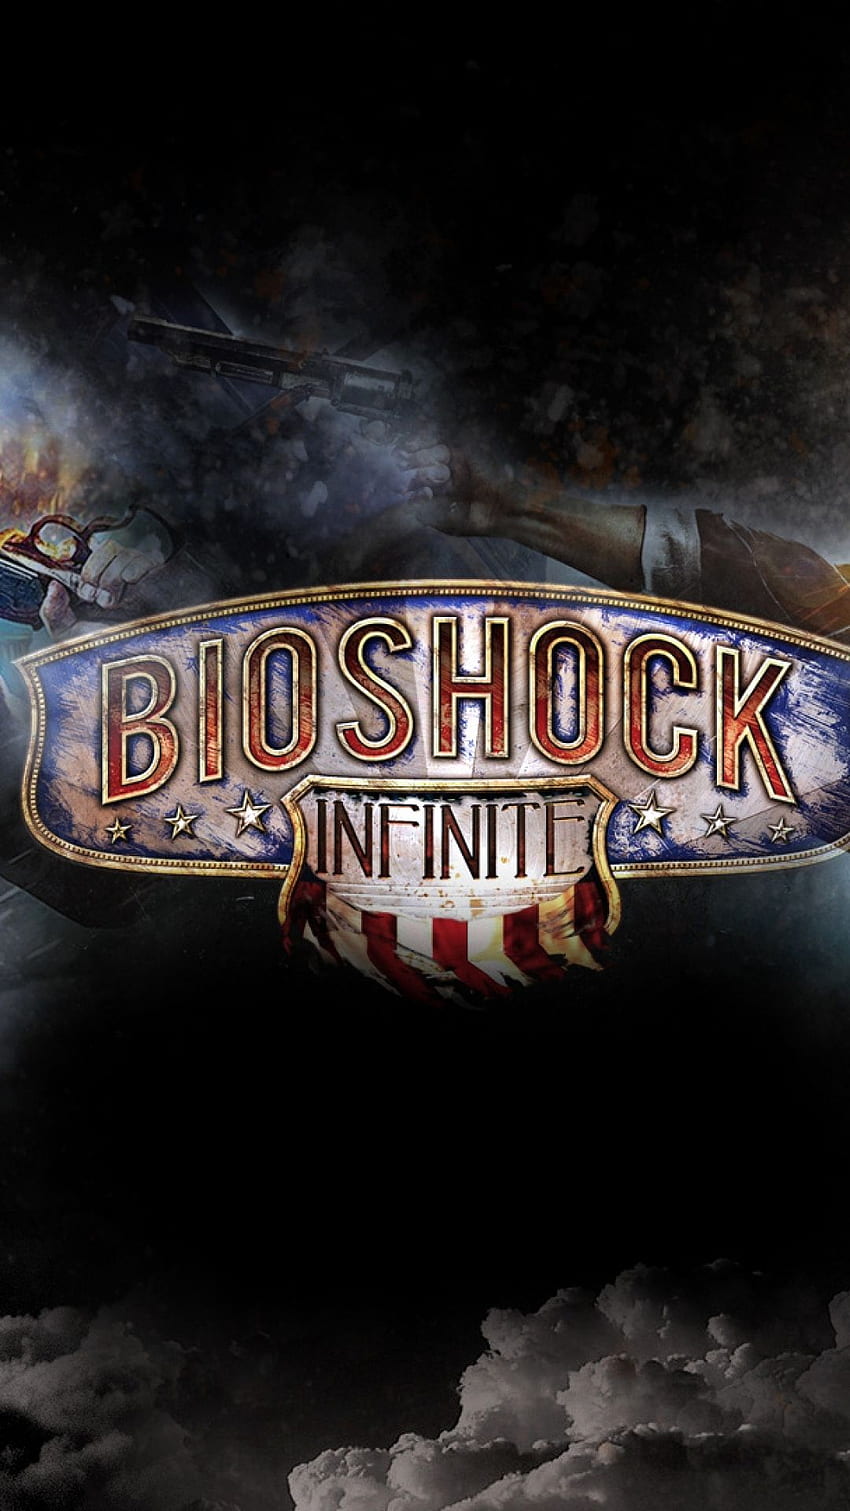 Bioshock iPhone Lovely Bioshock Infinite iPhone Of the Day - Left of The Hudson HD phone wallpaper